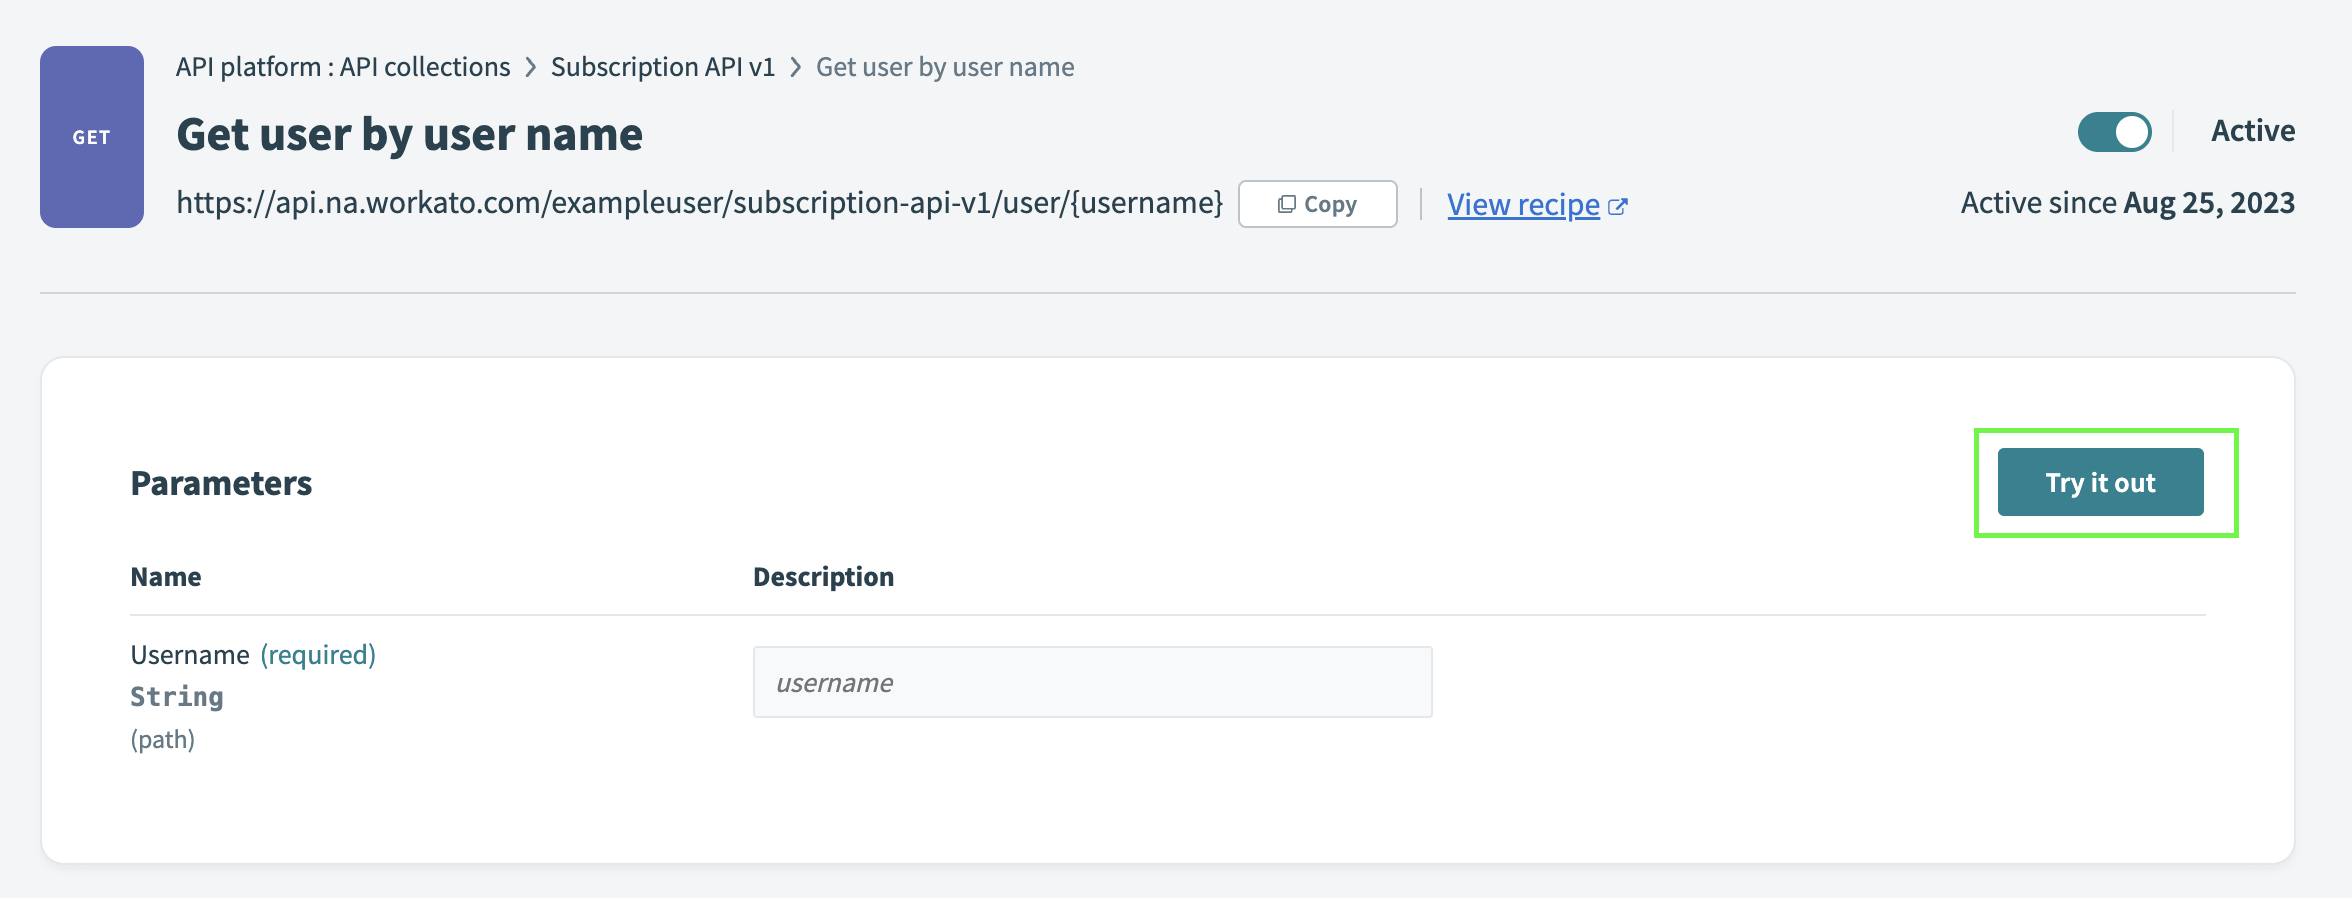 API recipe endpoint Try it out button